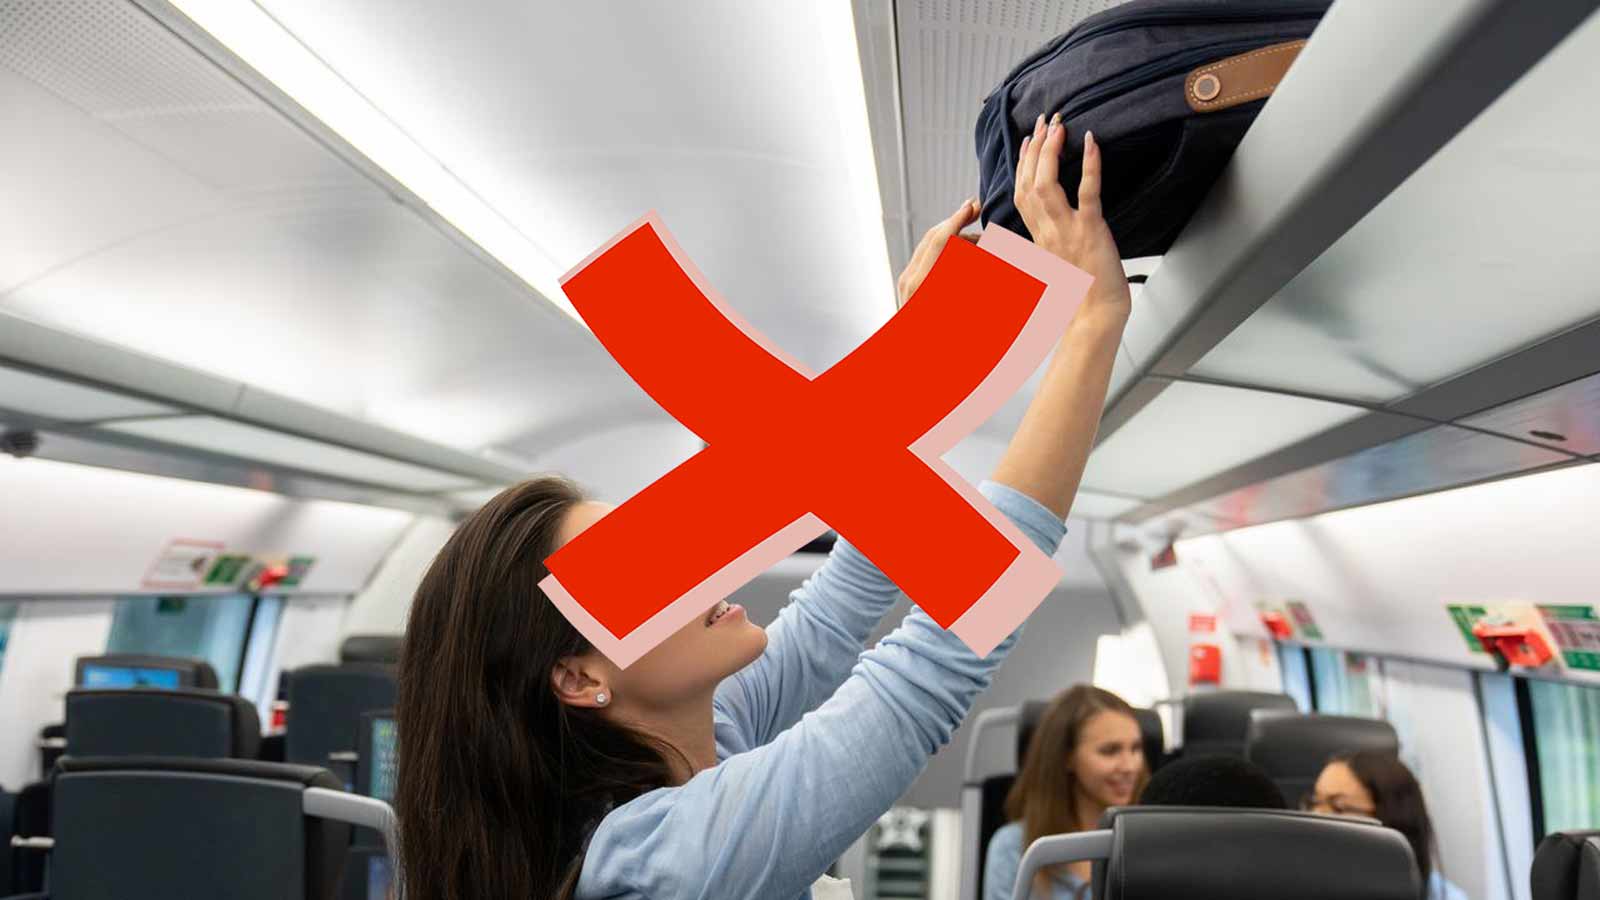 ‘Correct’ Way To Store Your Carry-On Luggage Is Not What You Think